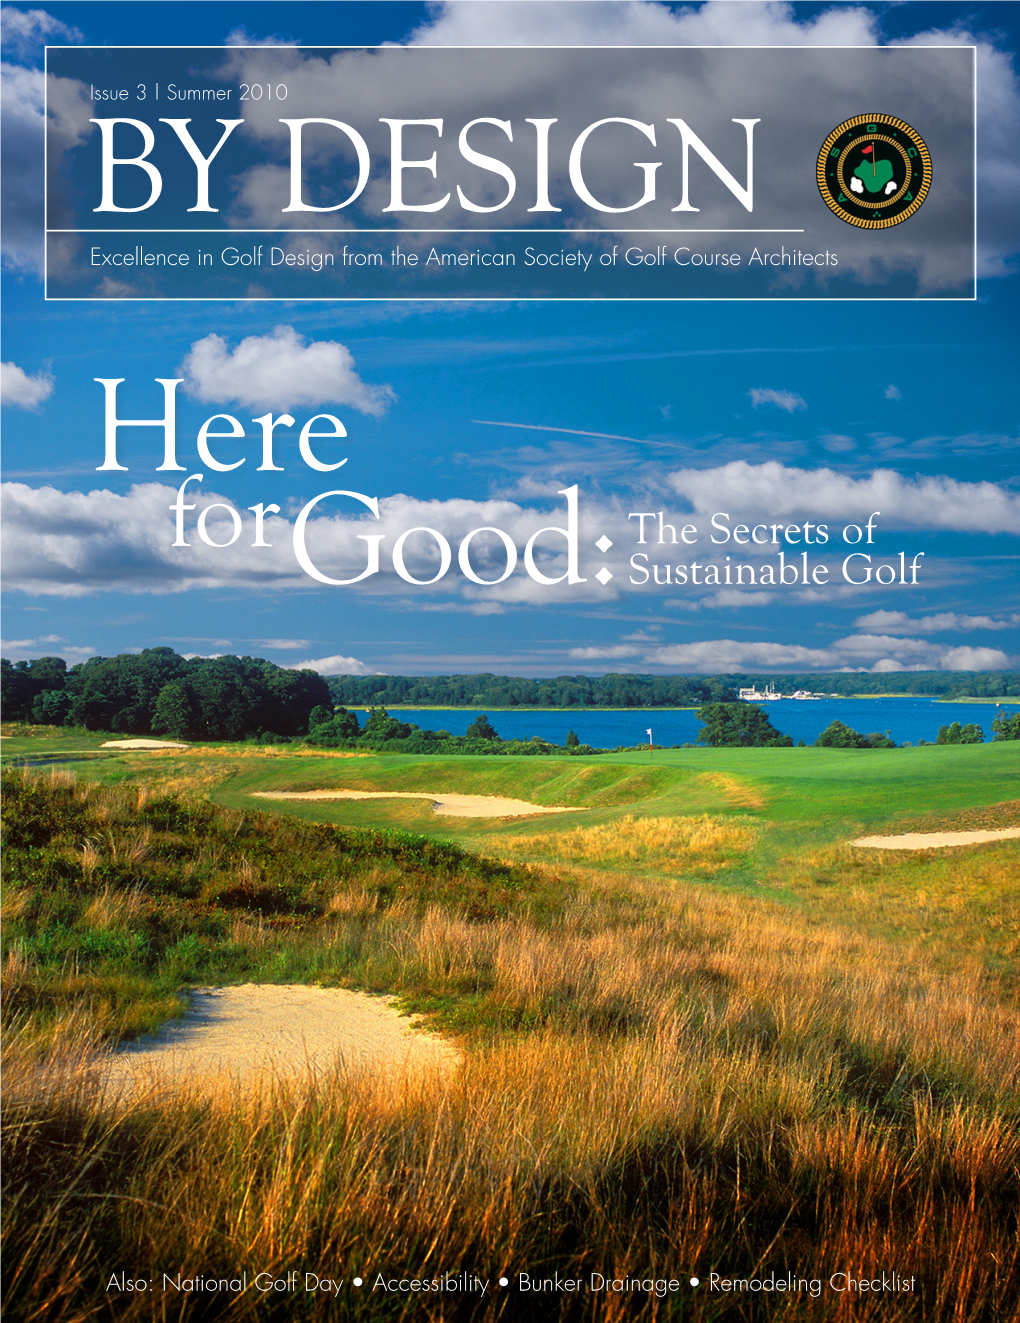 Good:The Secrets of Sustainable Golf